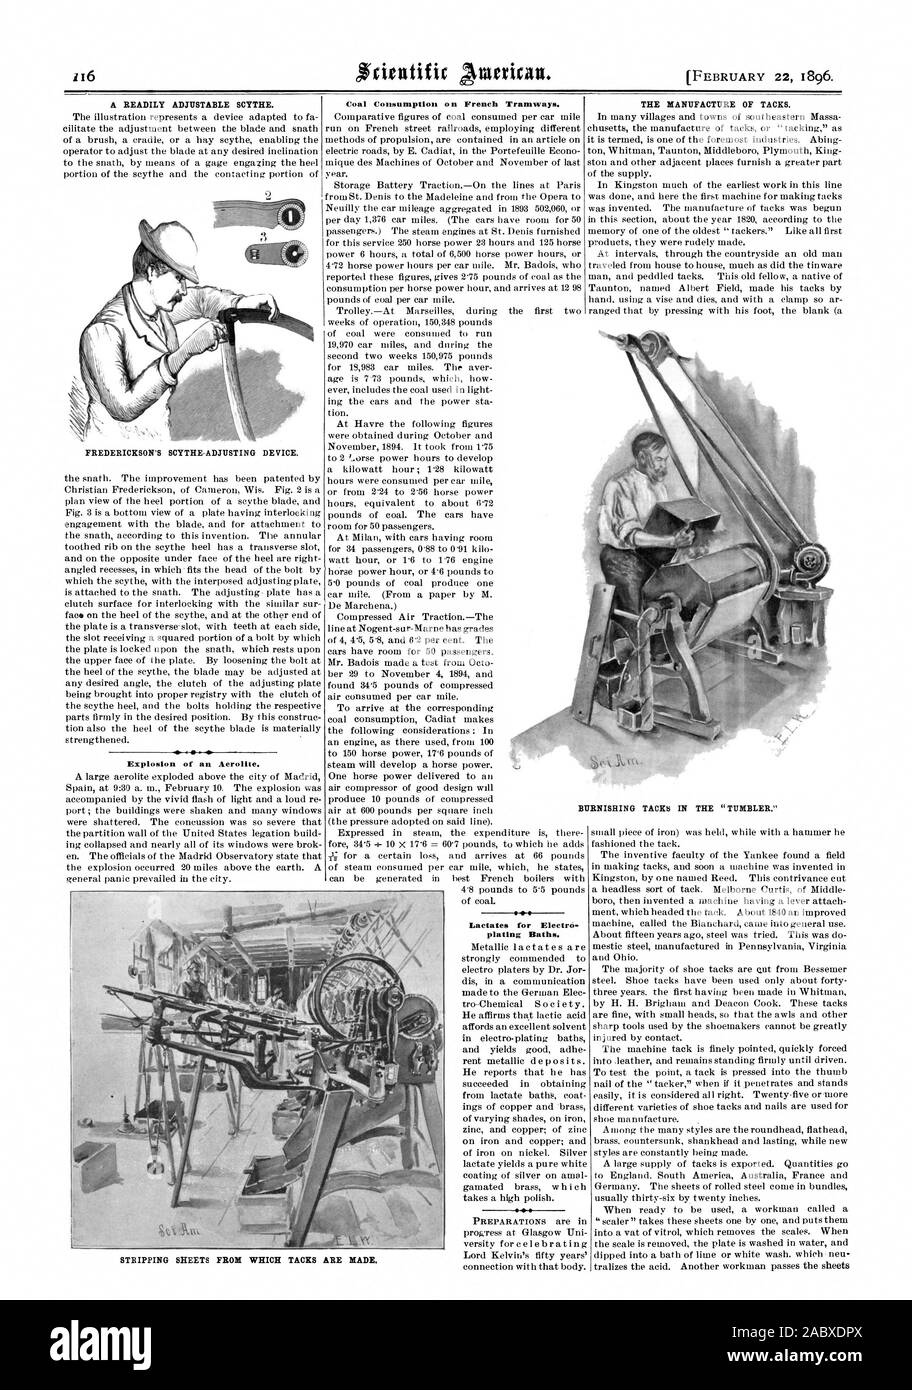 A READILY ADJUSTABLE SCYTHE. Explosion of an Aerolite. Coal Consumption on French Tramways. THE MANUFACTURE OF TACKS. Lactates for Electro plating Baths. BURNISHING TACKS IN THE 'TUMBLER., scientific american, 1896-02-22 Stock Photo